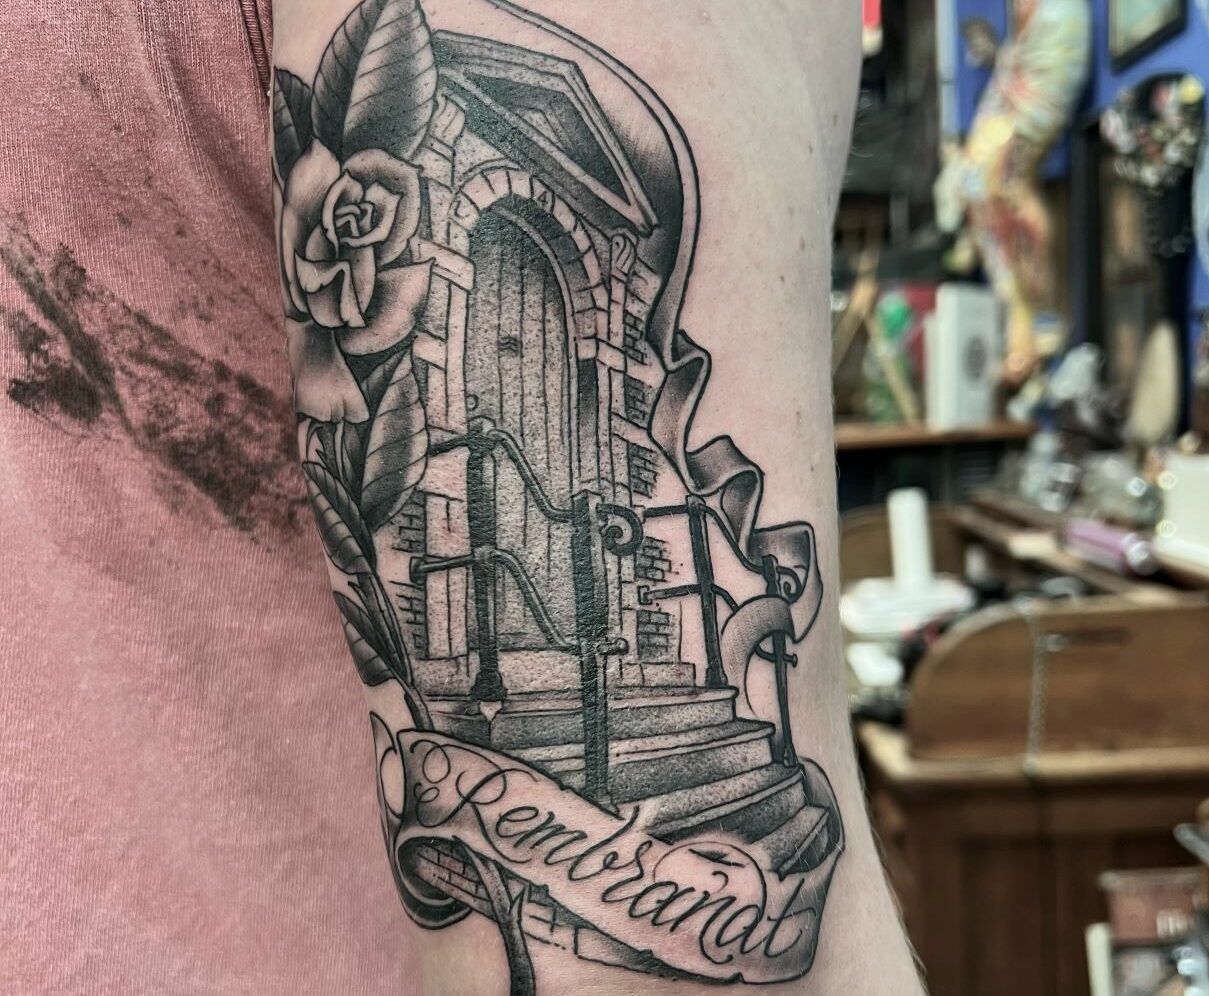 Vintage Karma  Memorial tattoo by our apprentice Tash  She is doing  discounted tattoos so call the shop to schedule  Facebook